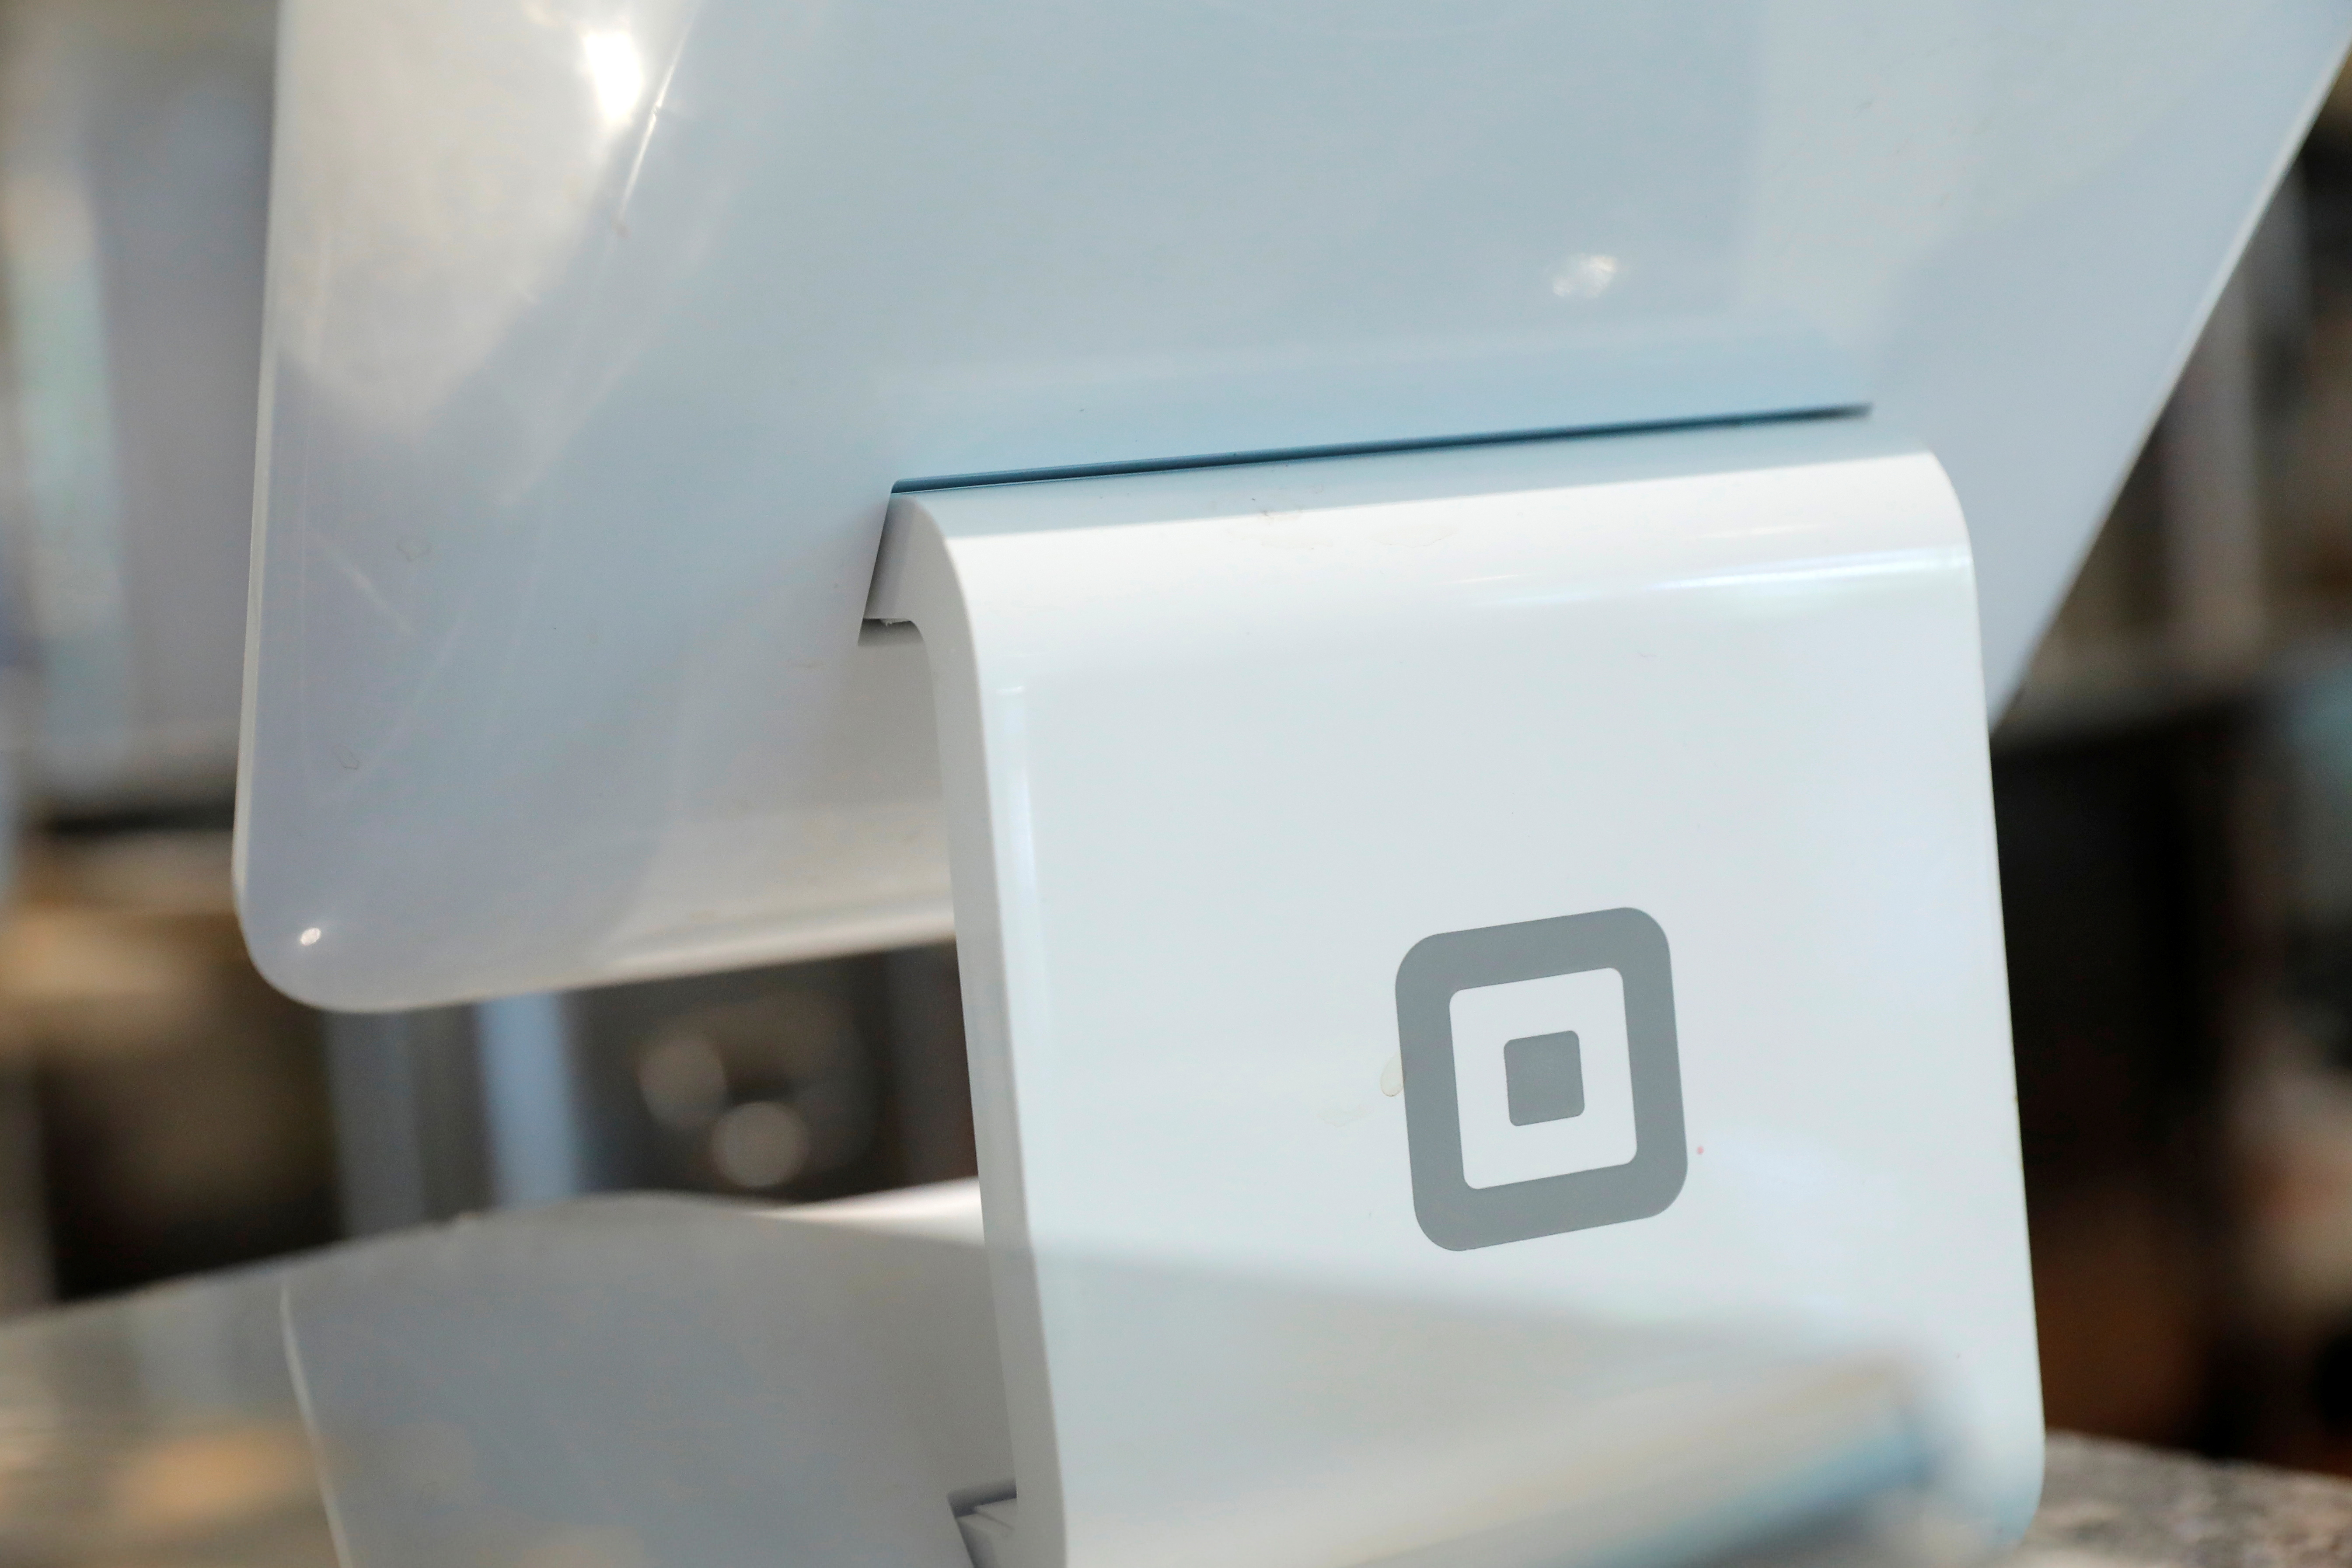 Why is Square buying Afterpay?